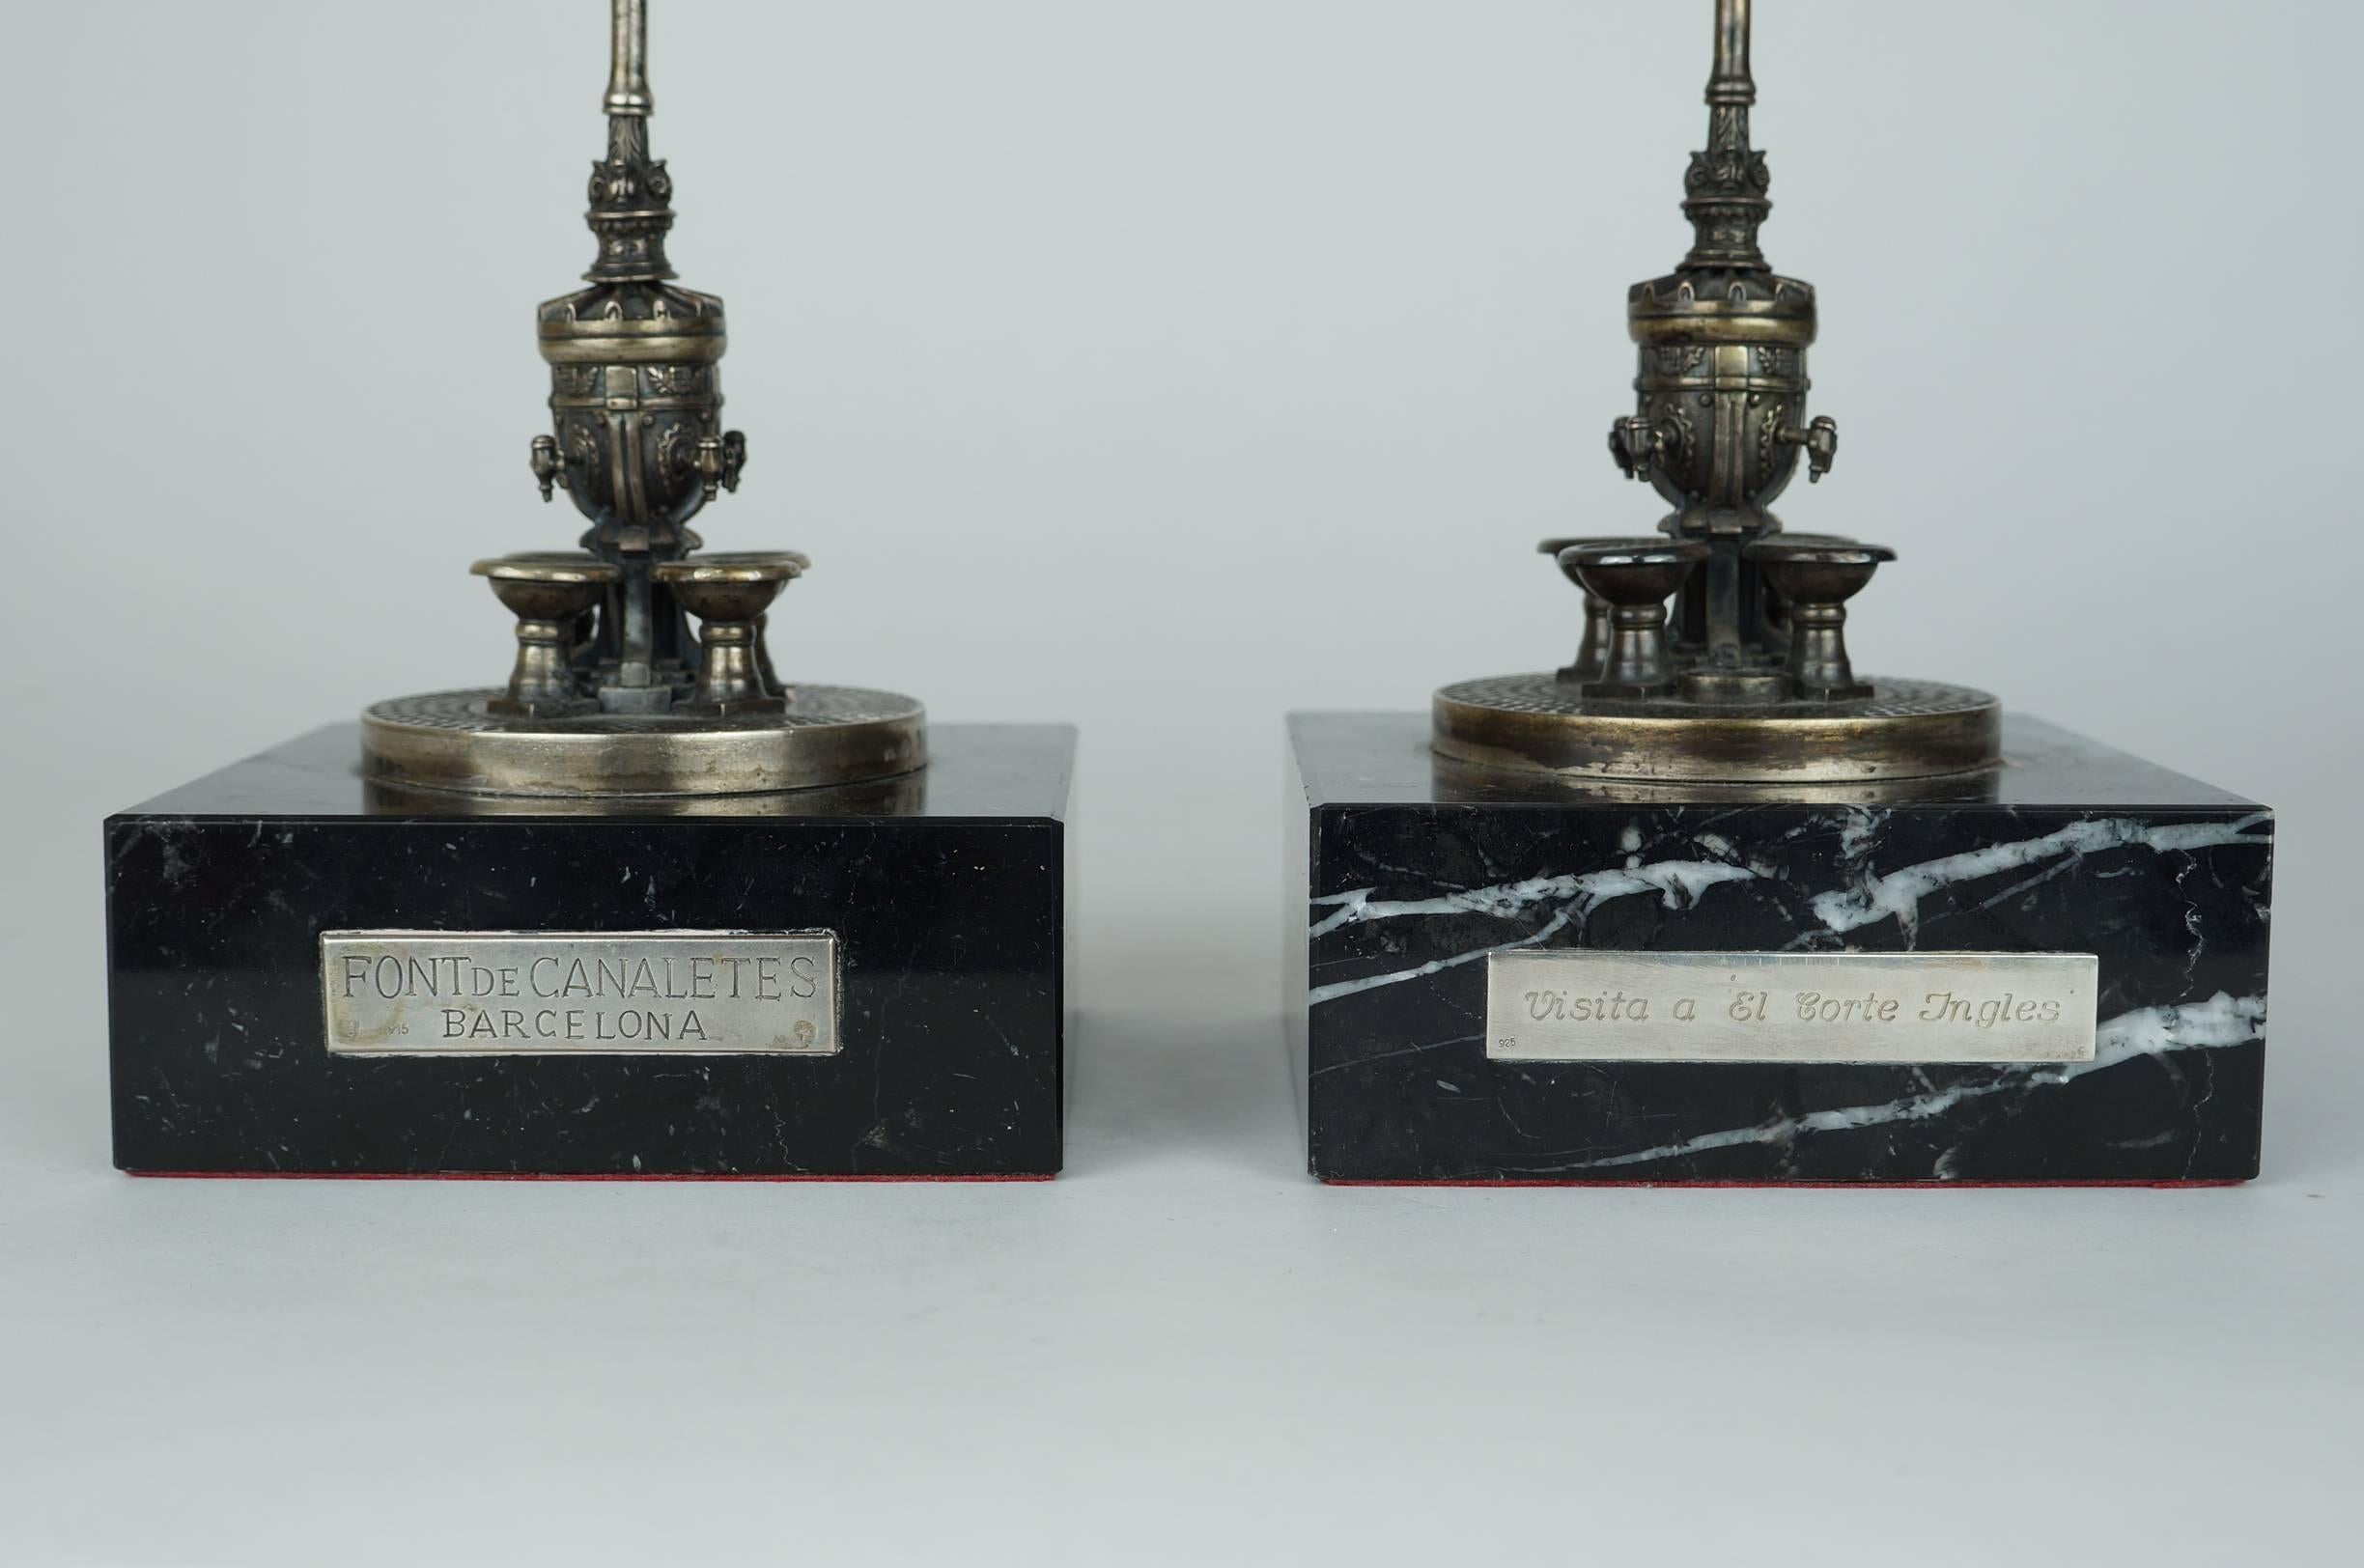 Pair of Silver Miniature form Floor Torcheres on Marble Base
Possibly made after an architectural street torcheres in Barcelona
Marked 925
Stock Number: DA200